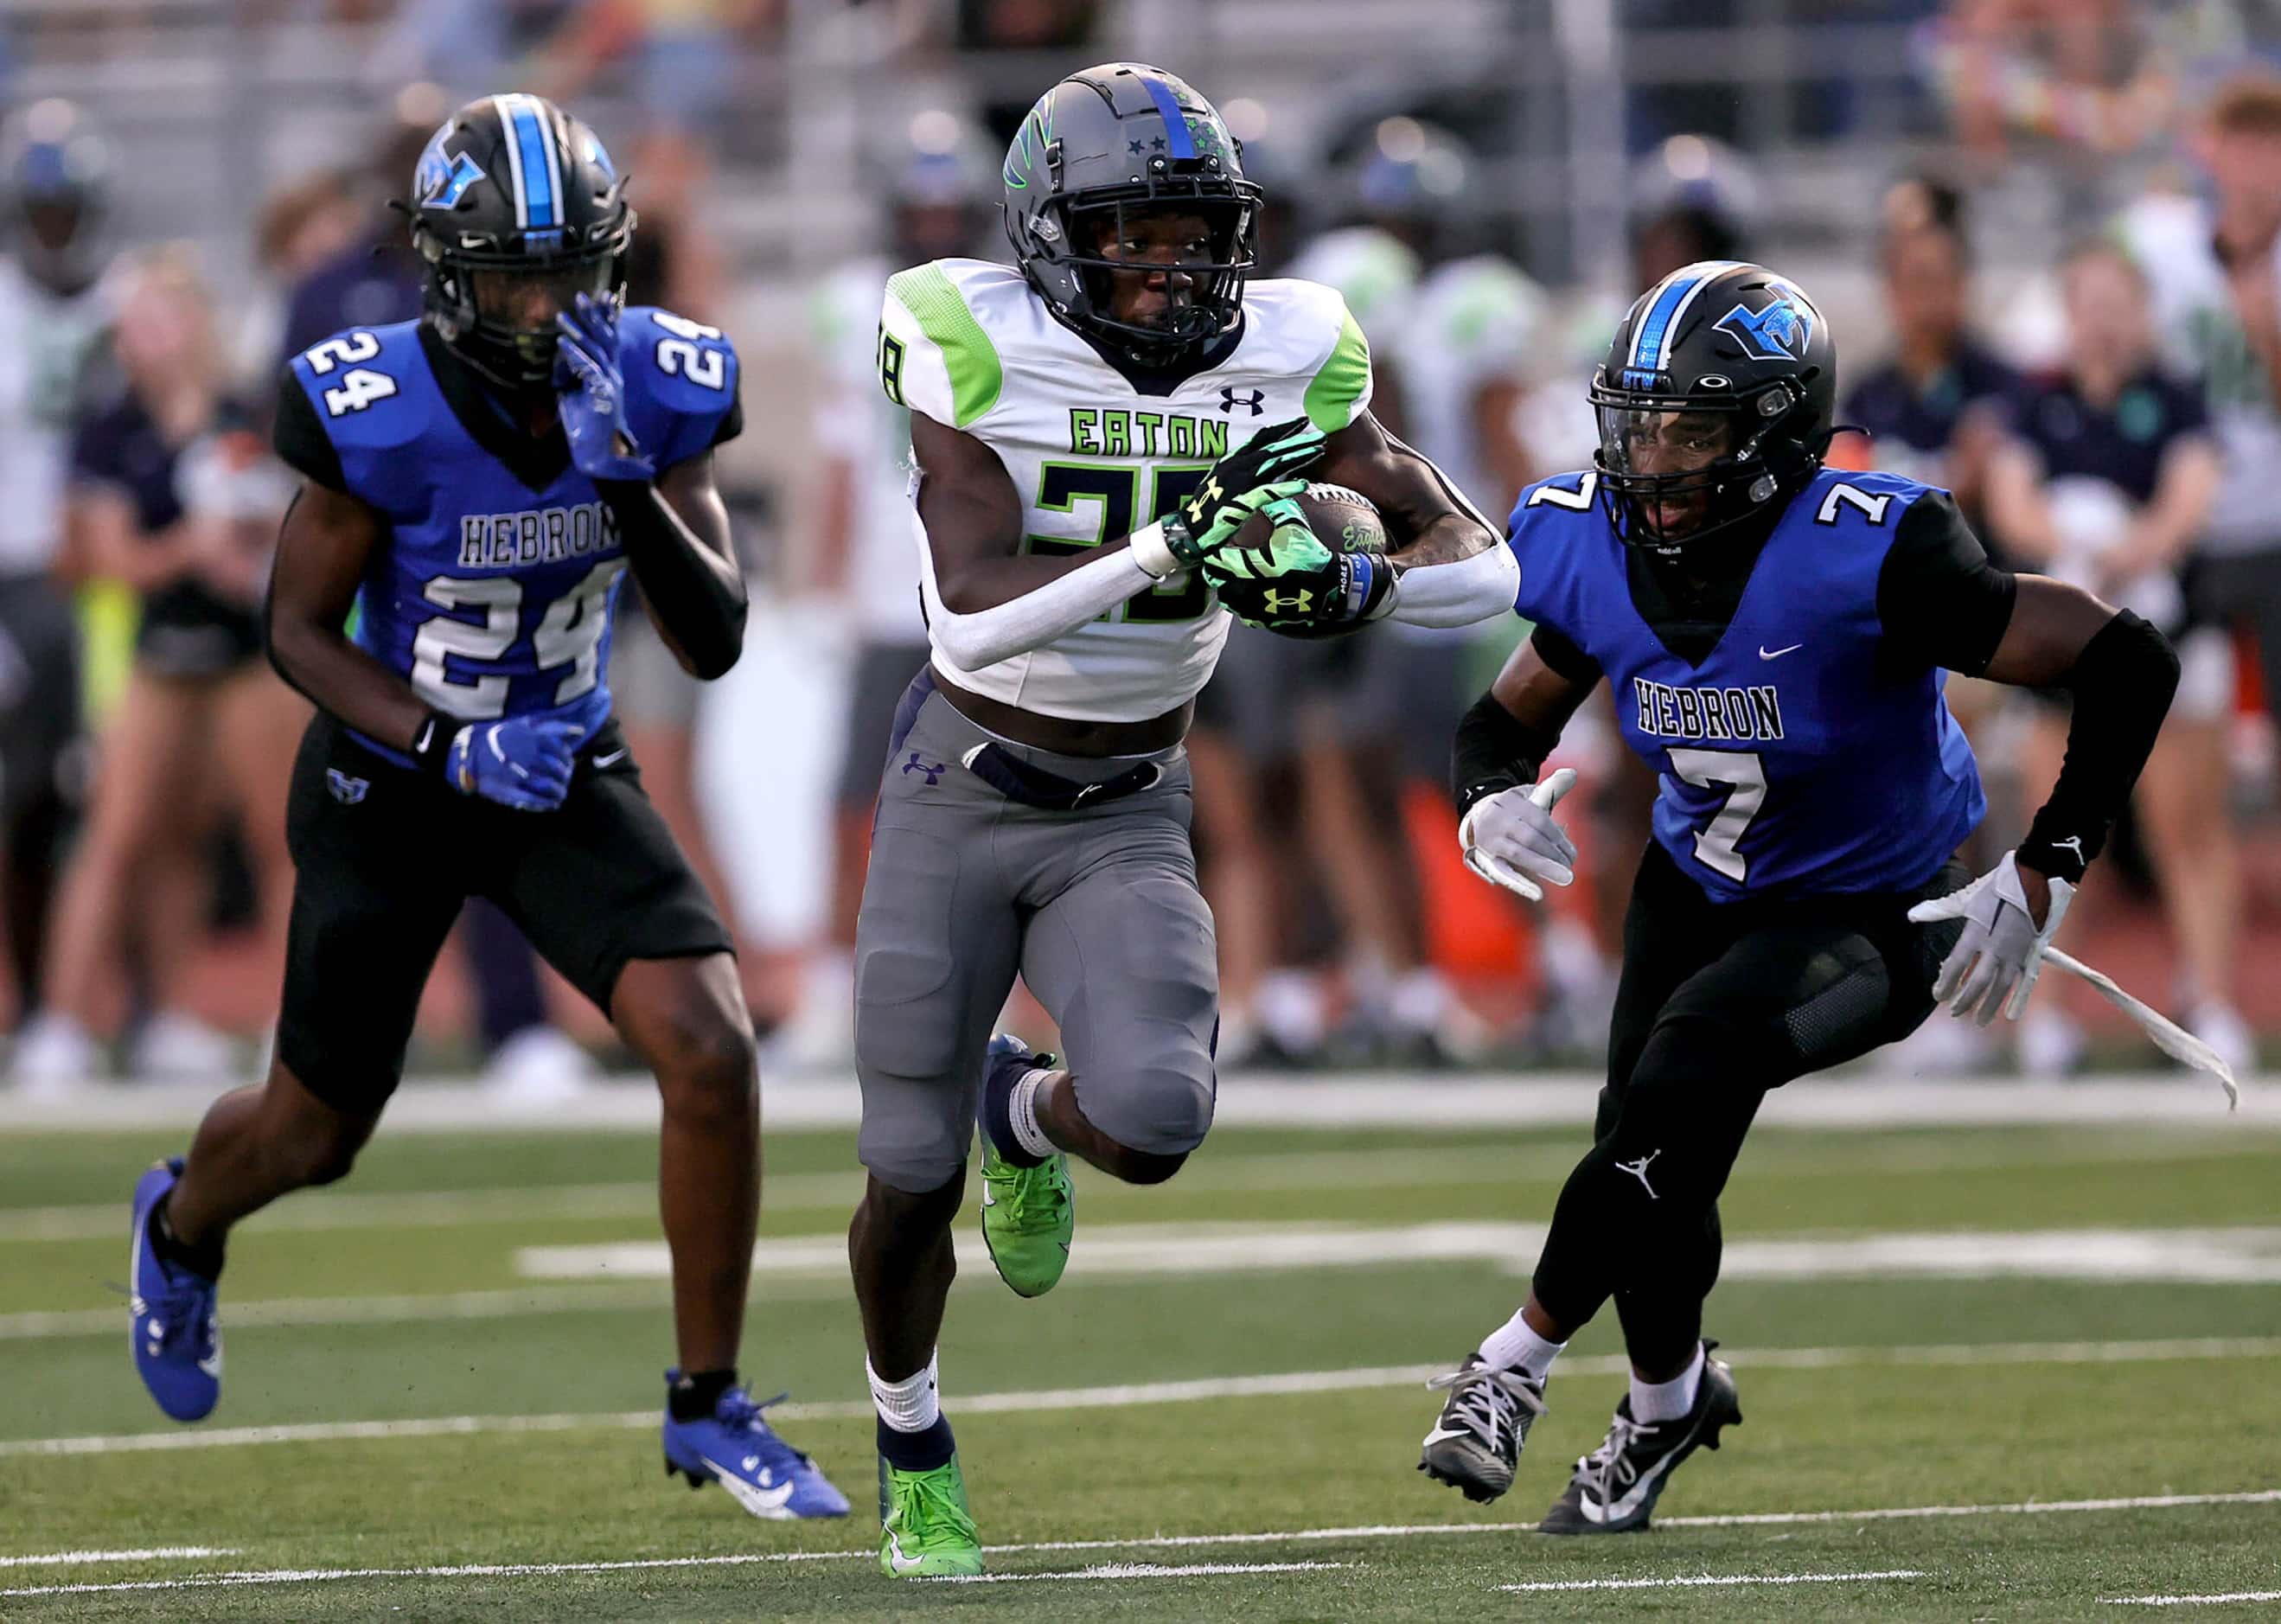 Eaton running back Demarion Williams (28) goes 27 yards for a touchdown against Hebron...